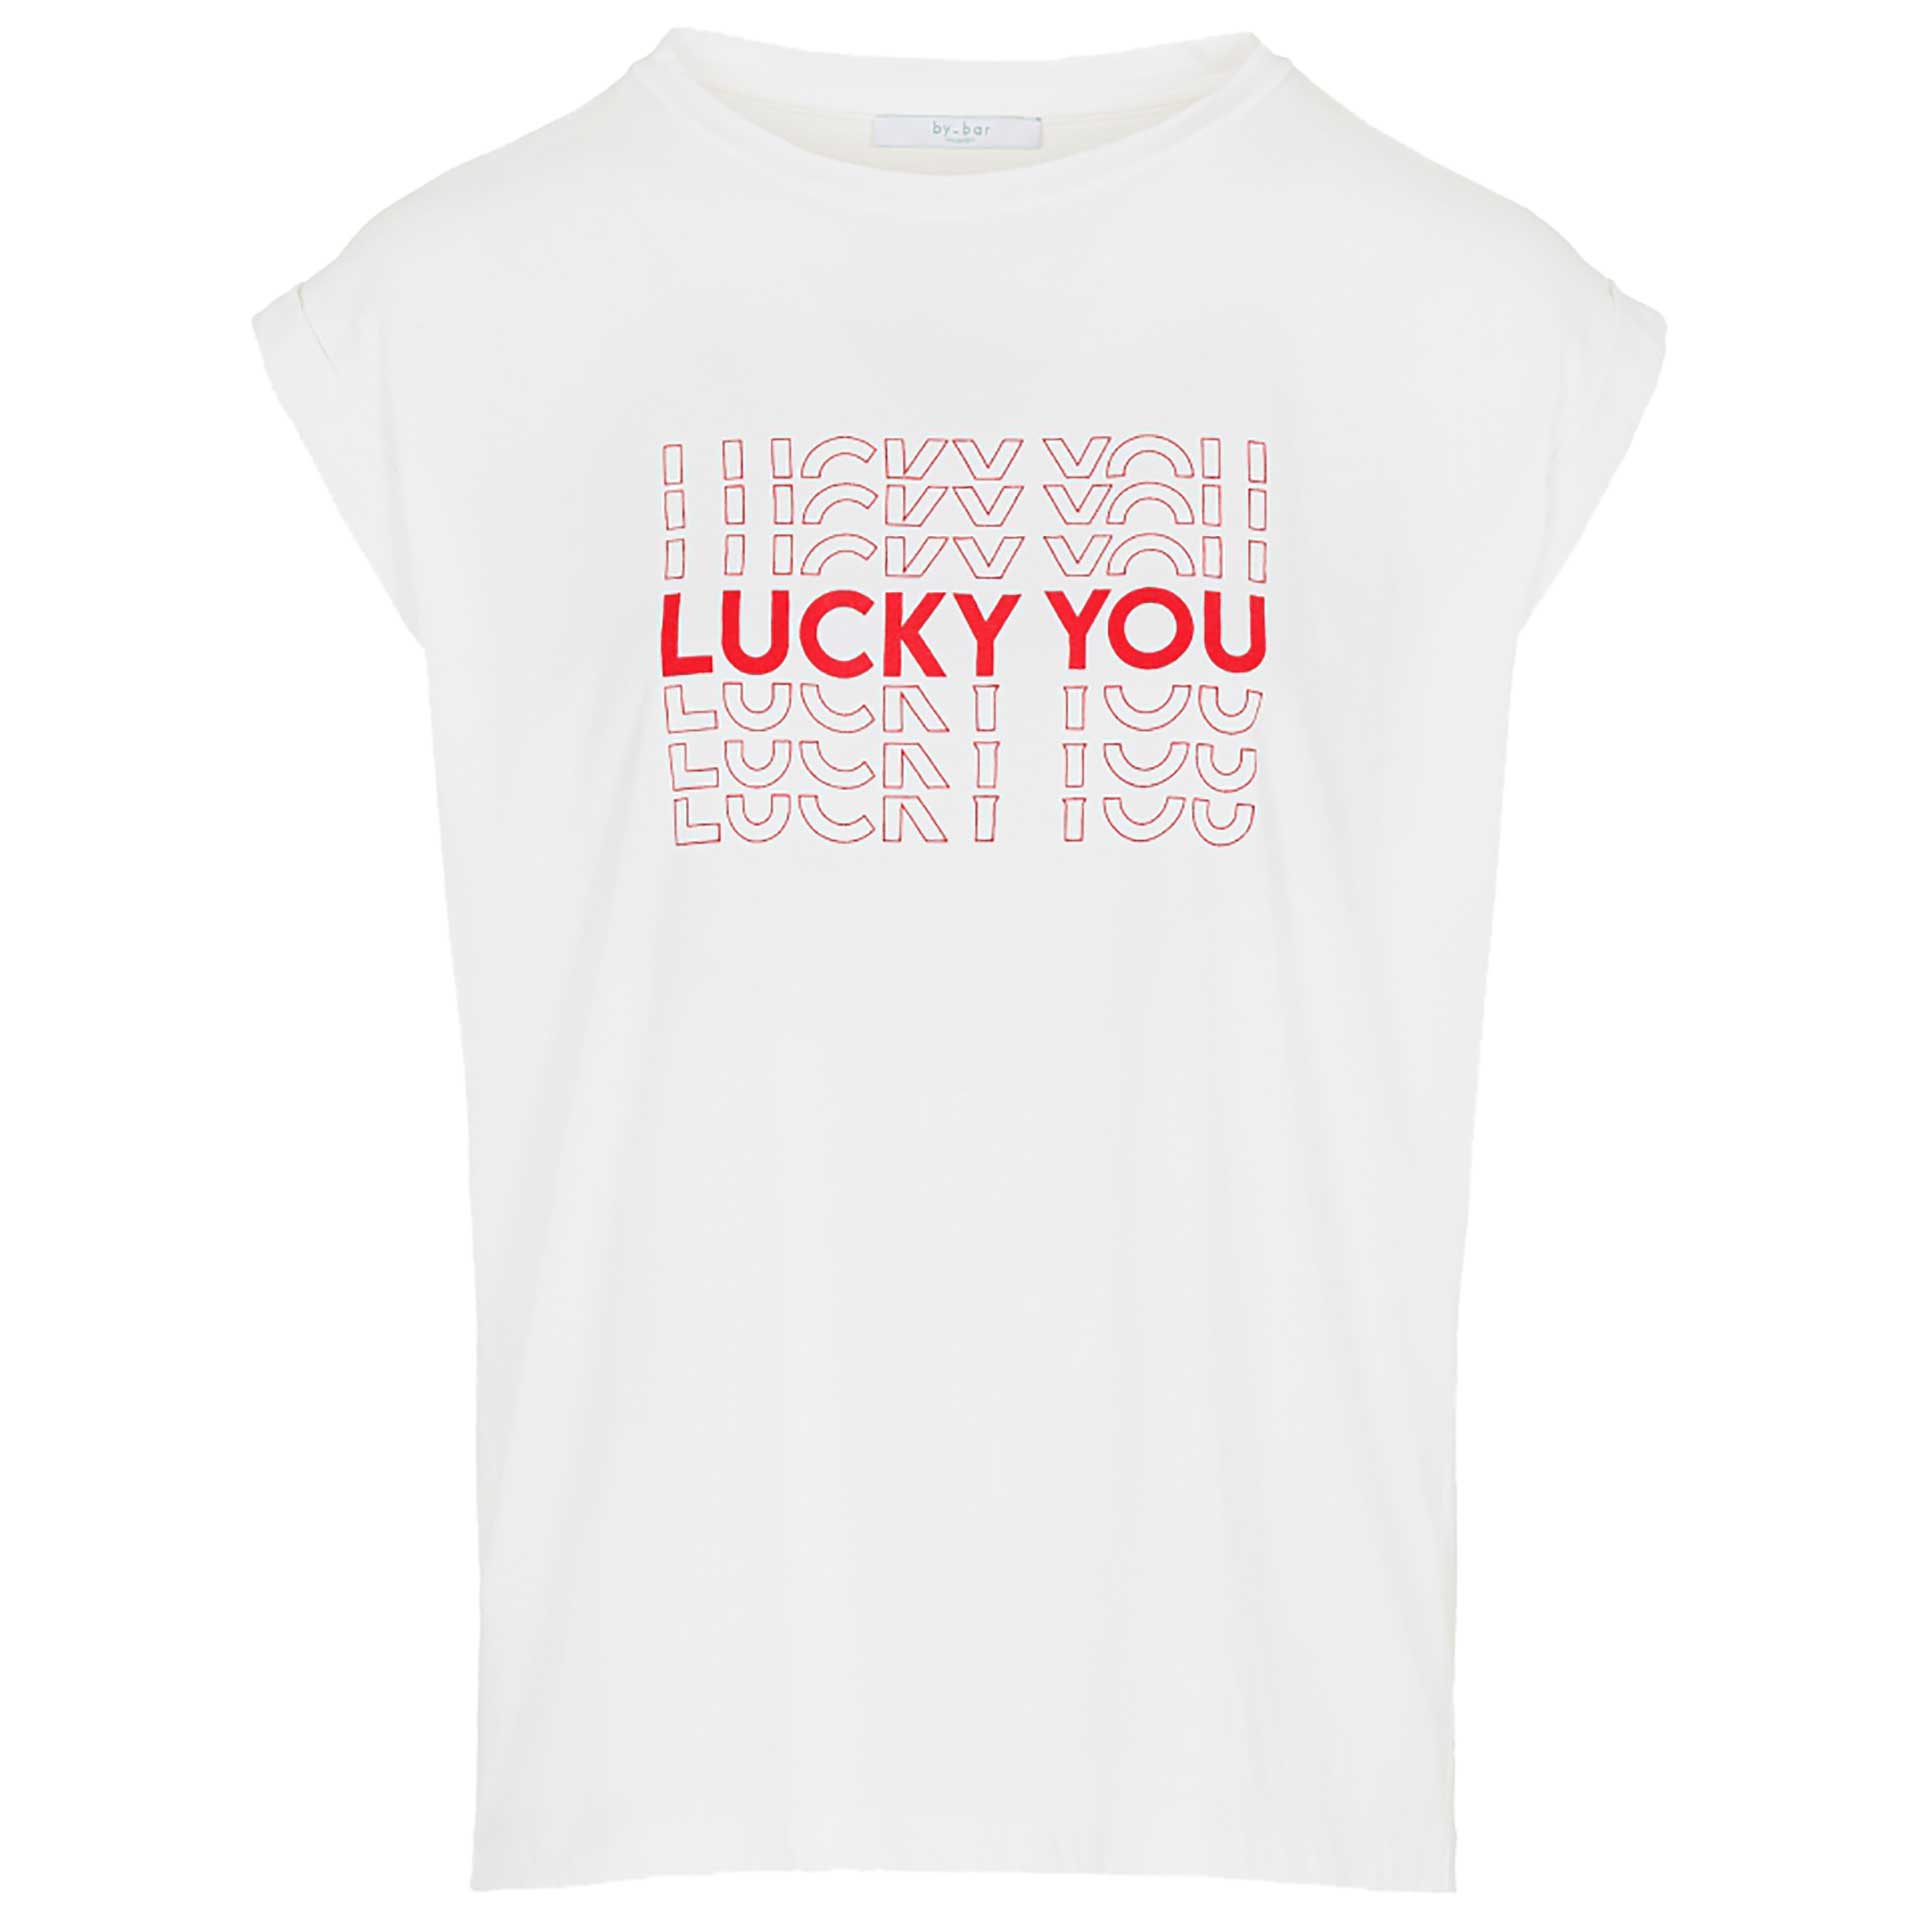 T-shirt Thelma lucky you